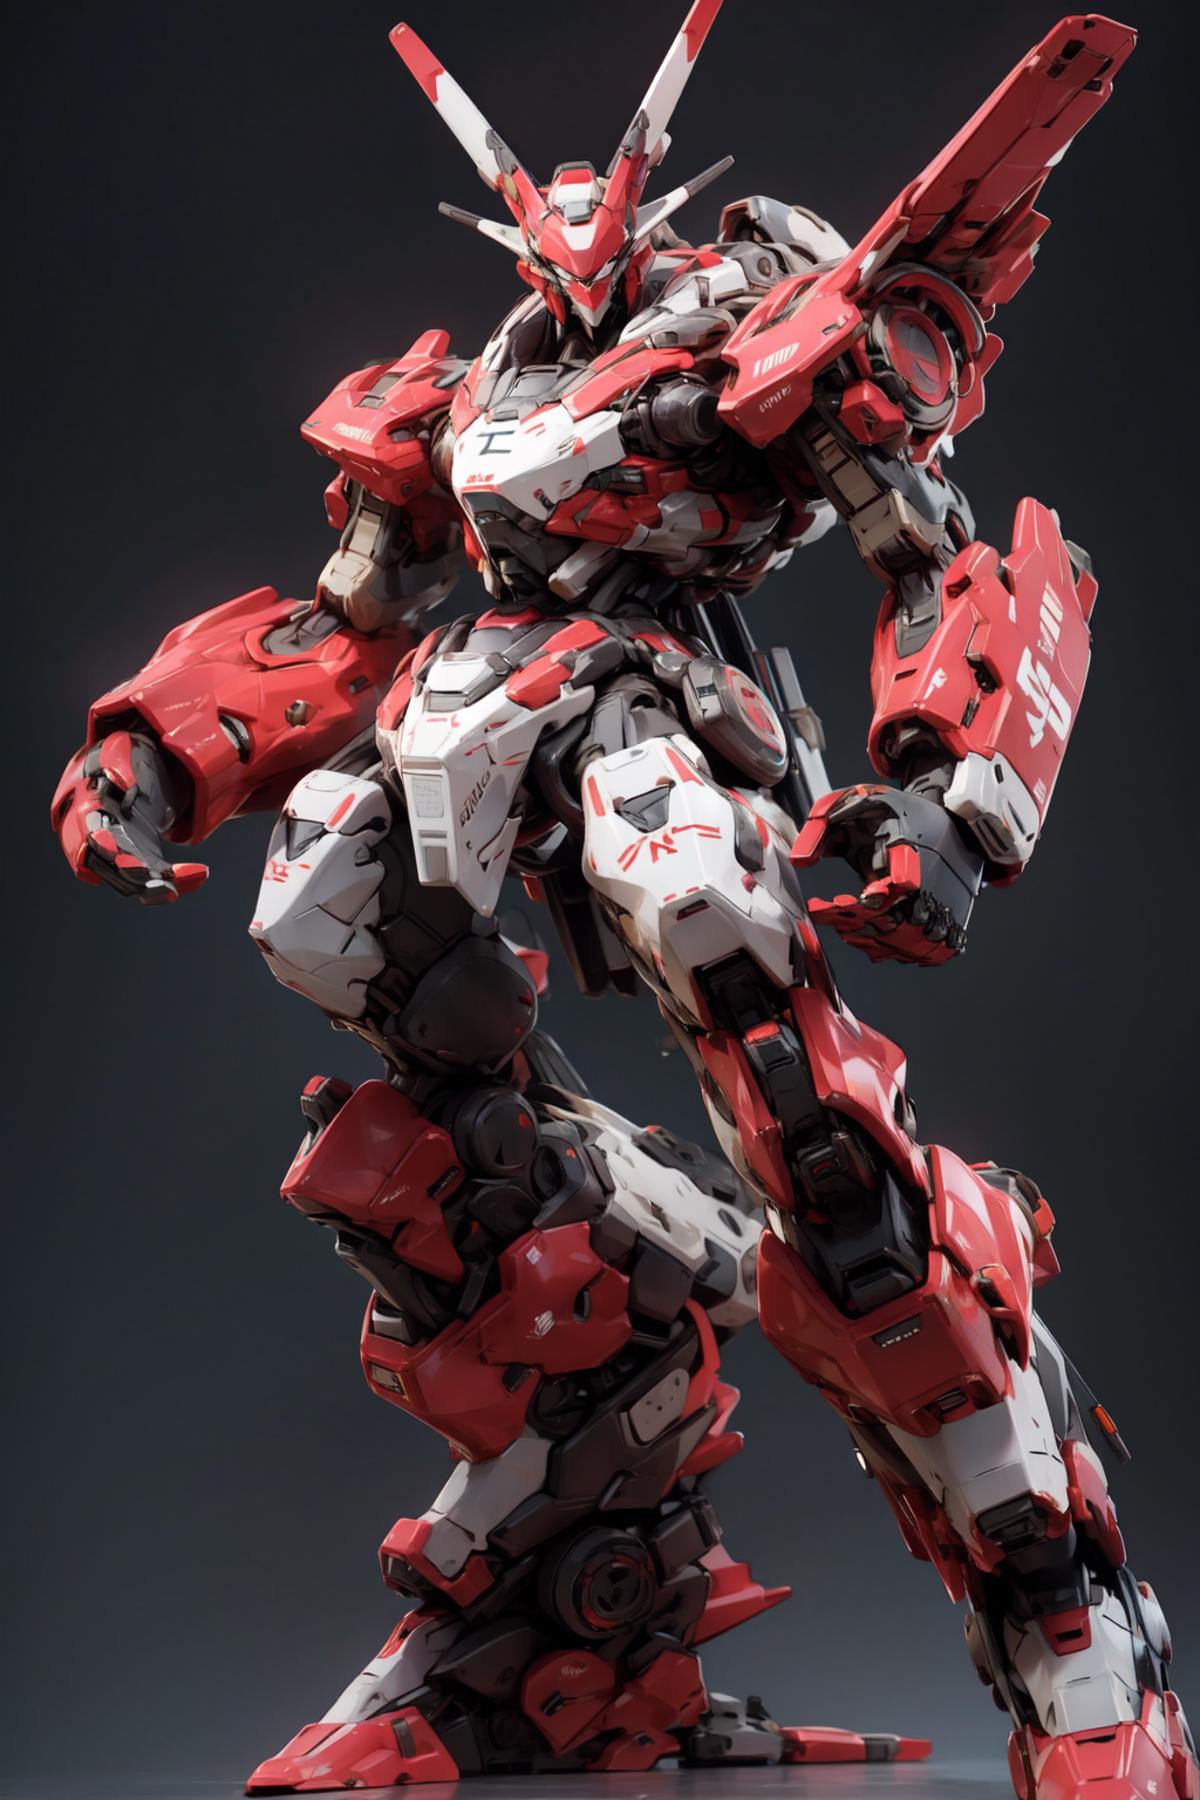 A red and white robot stands in a dark background.